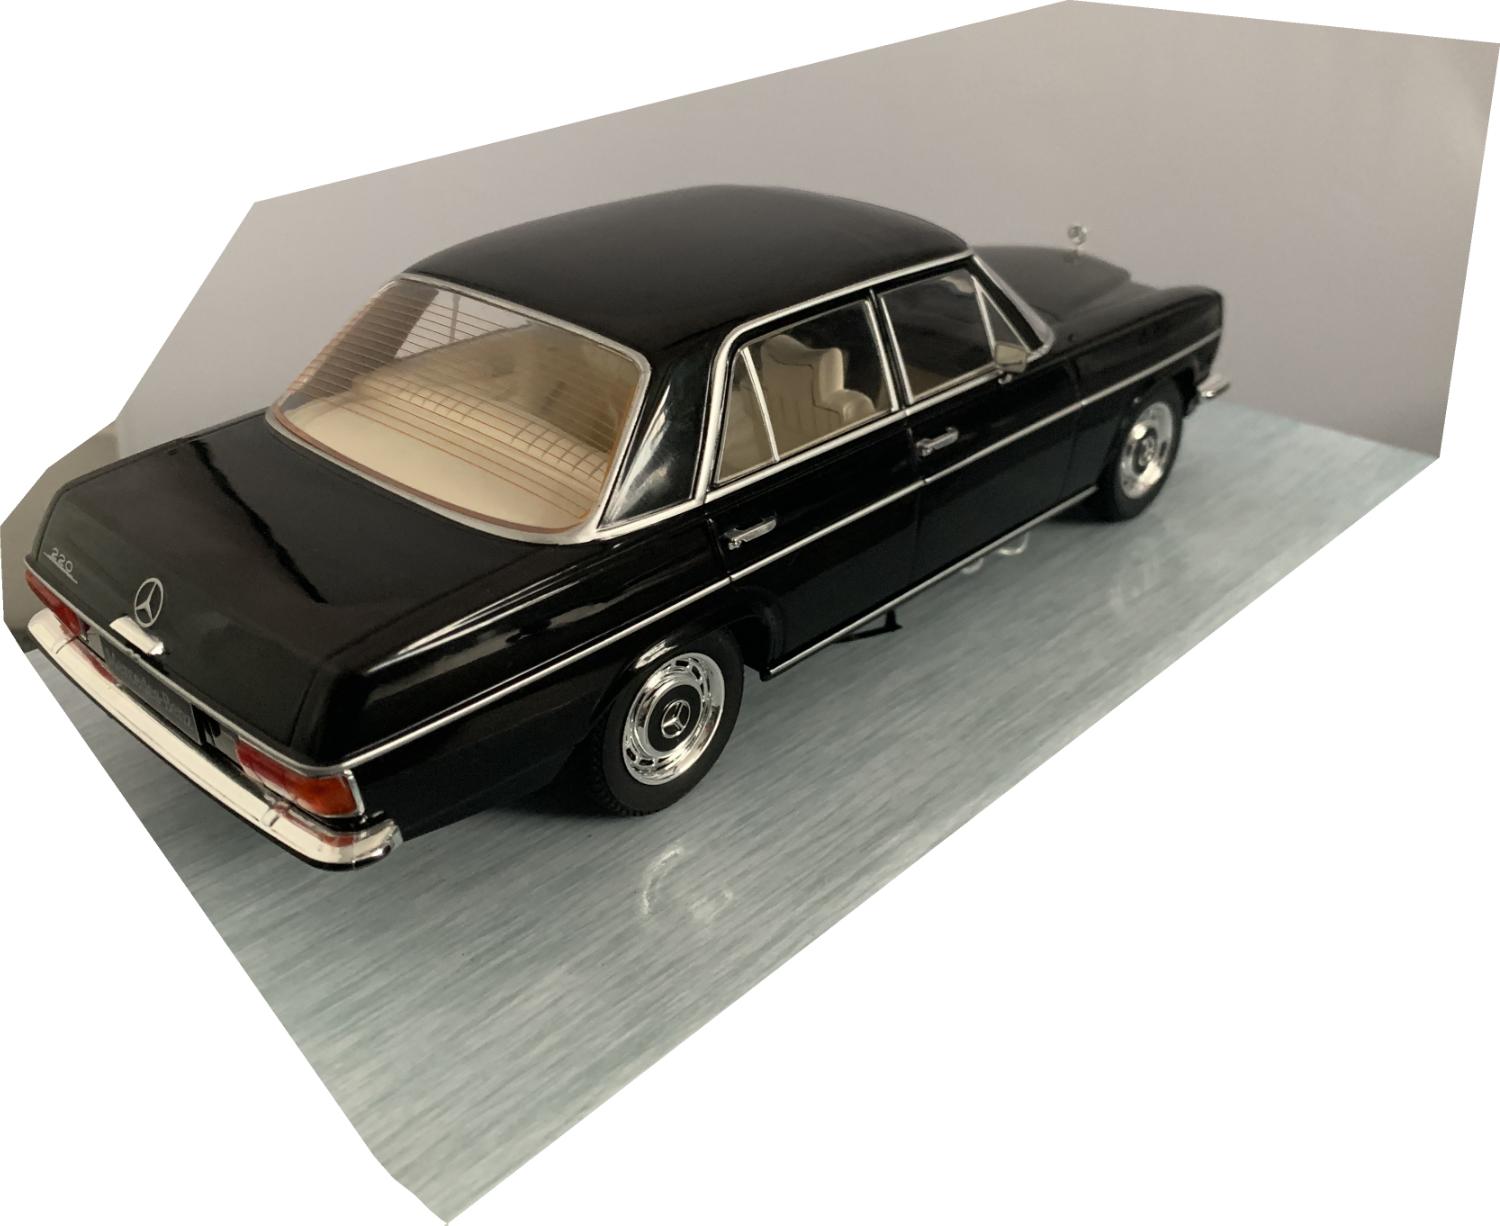 Mercedes Benz 220 D (W115) 1972 in black 1:18 scale model from Model Car Group